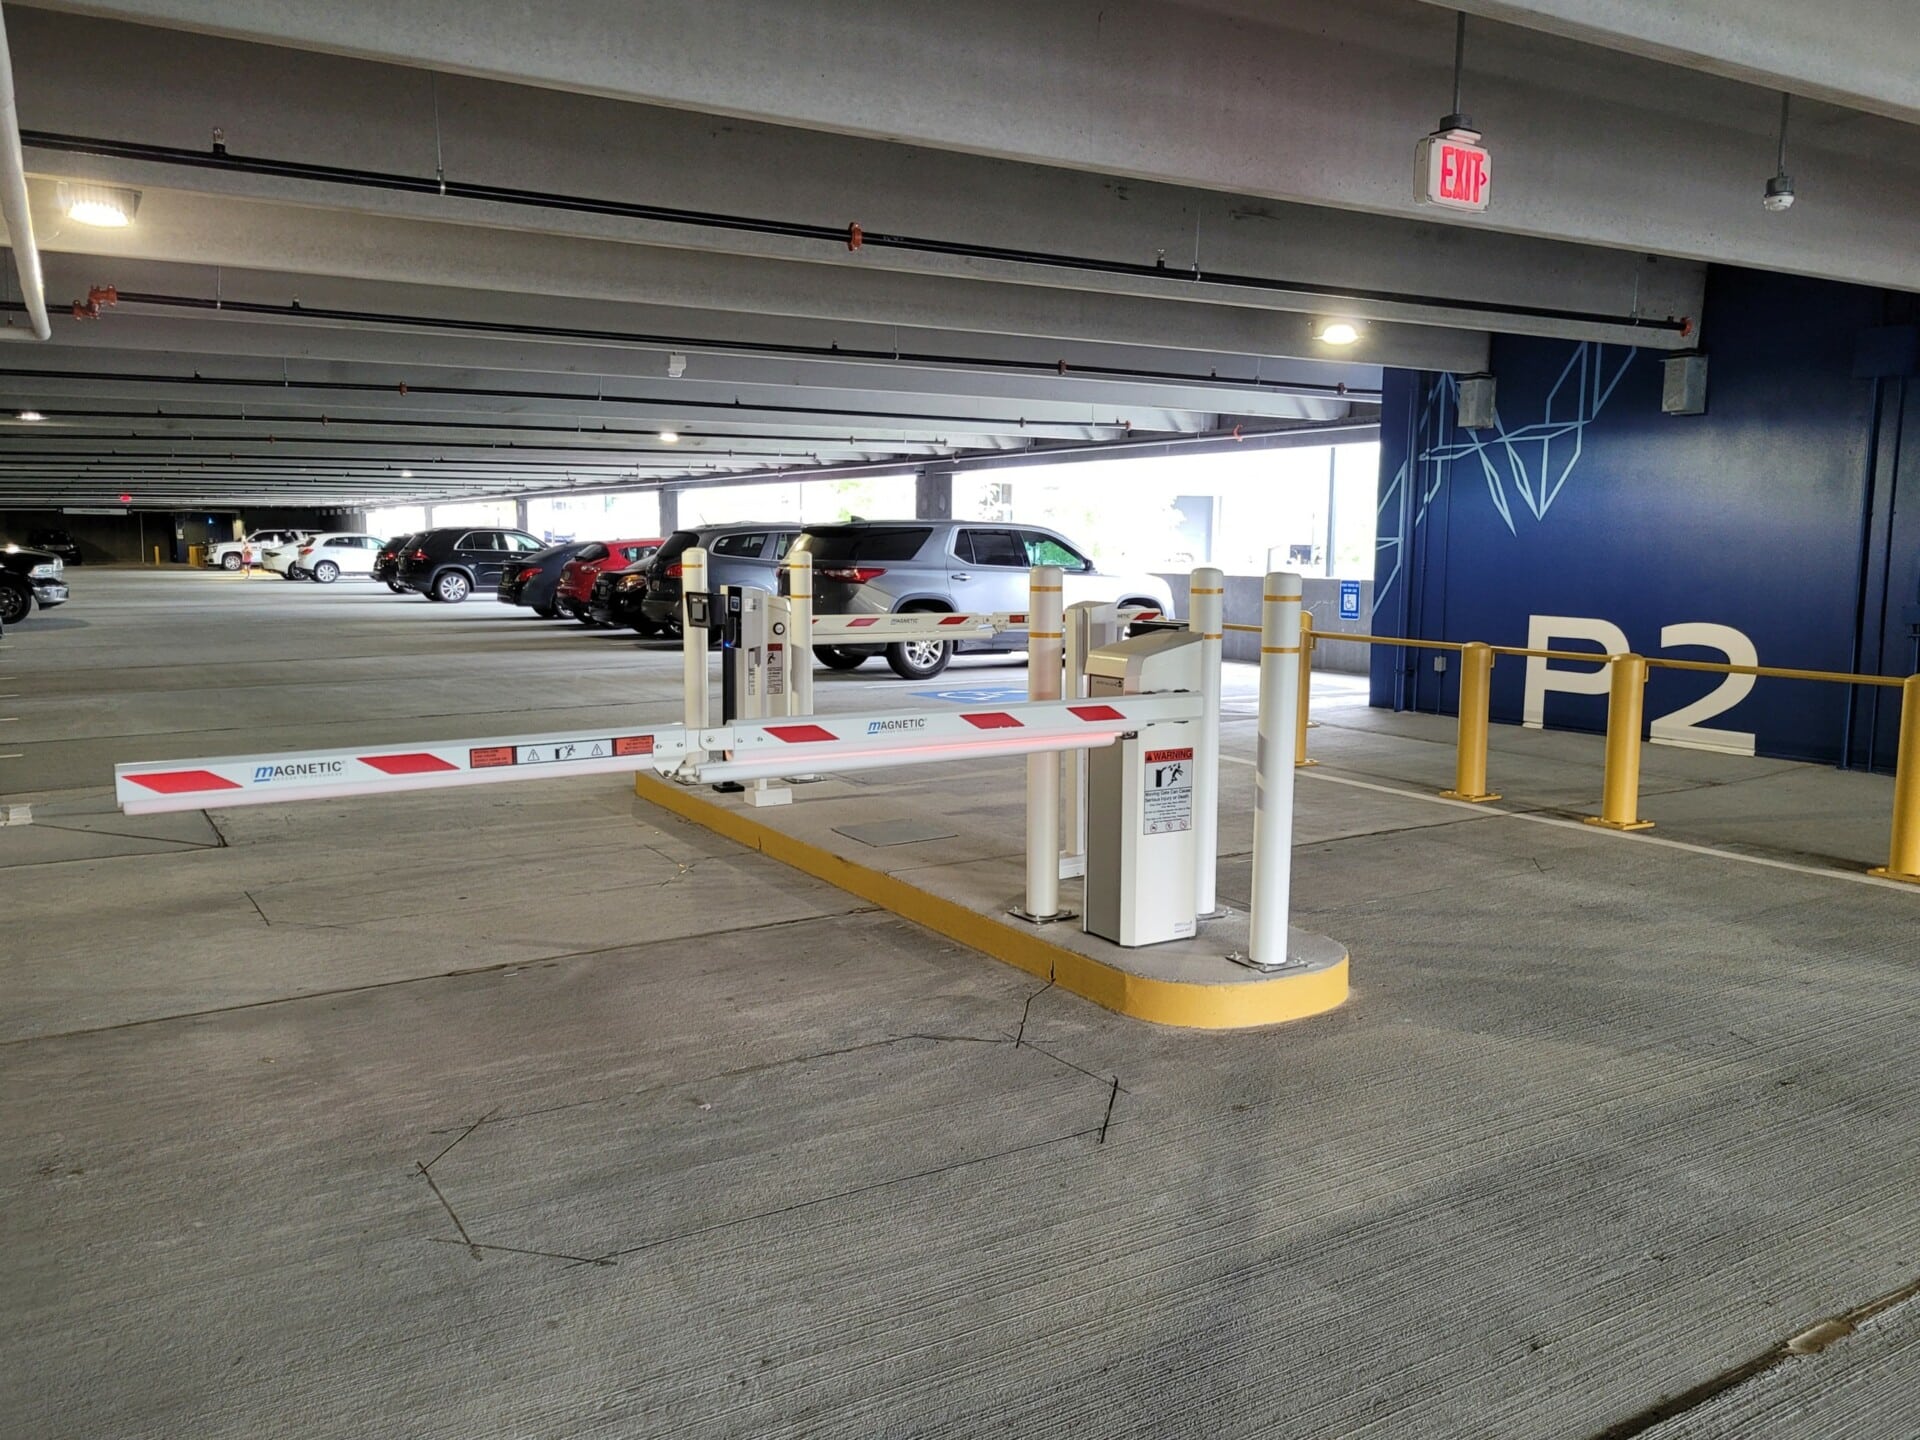 Parking area with security lift gates.